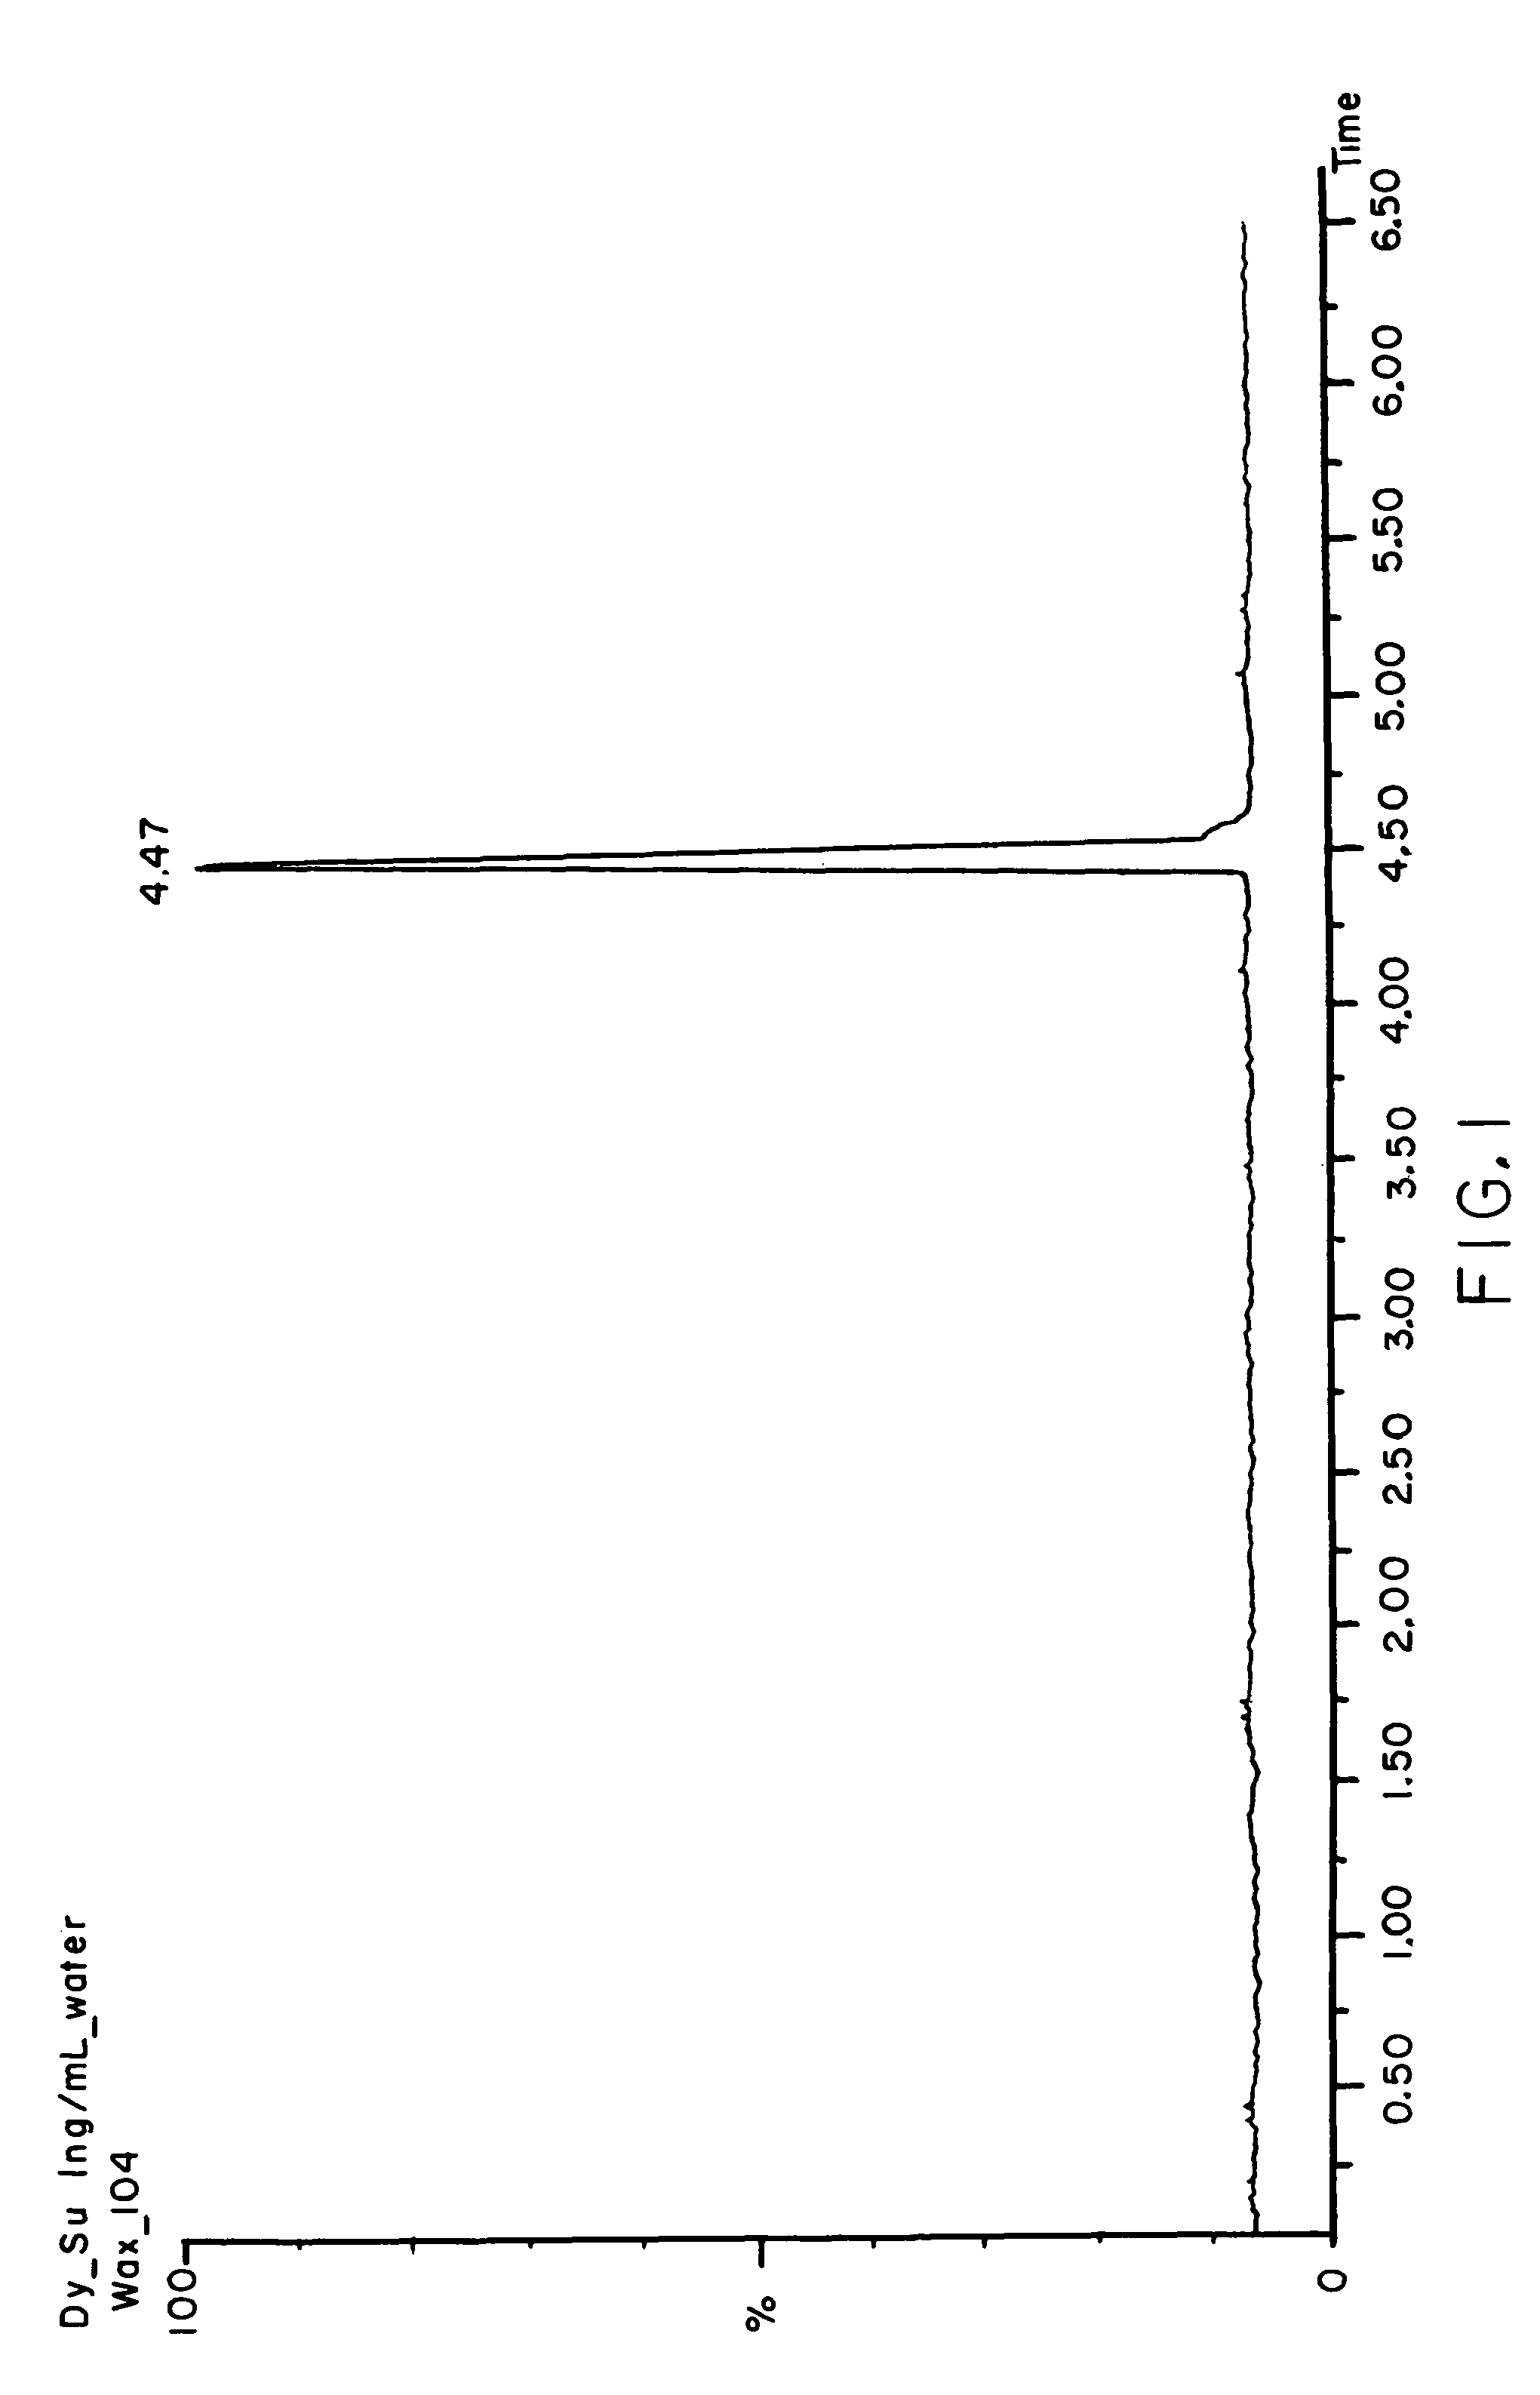 Porous materials for solid phase extraction and chromatography and processes for preparation and use thereof